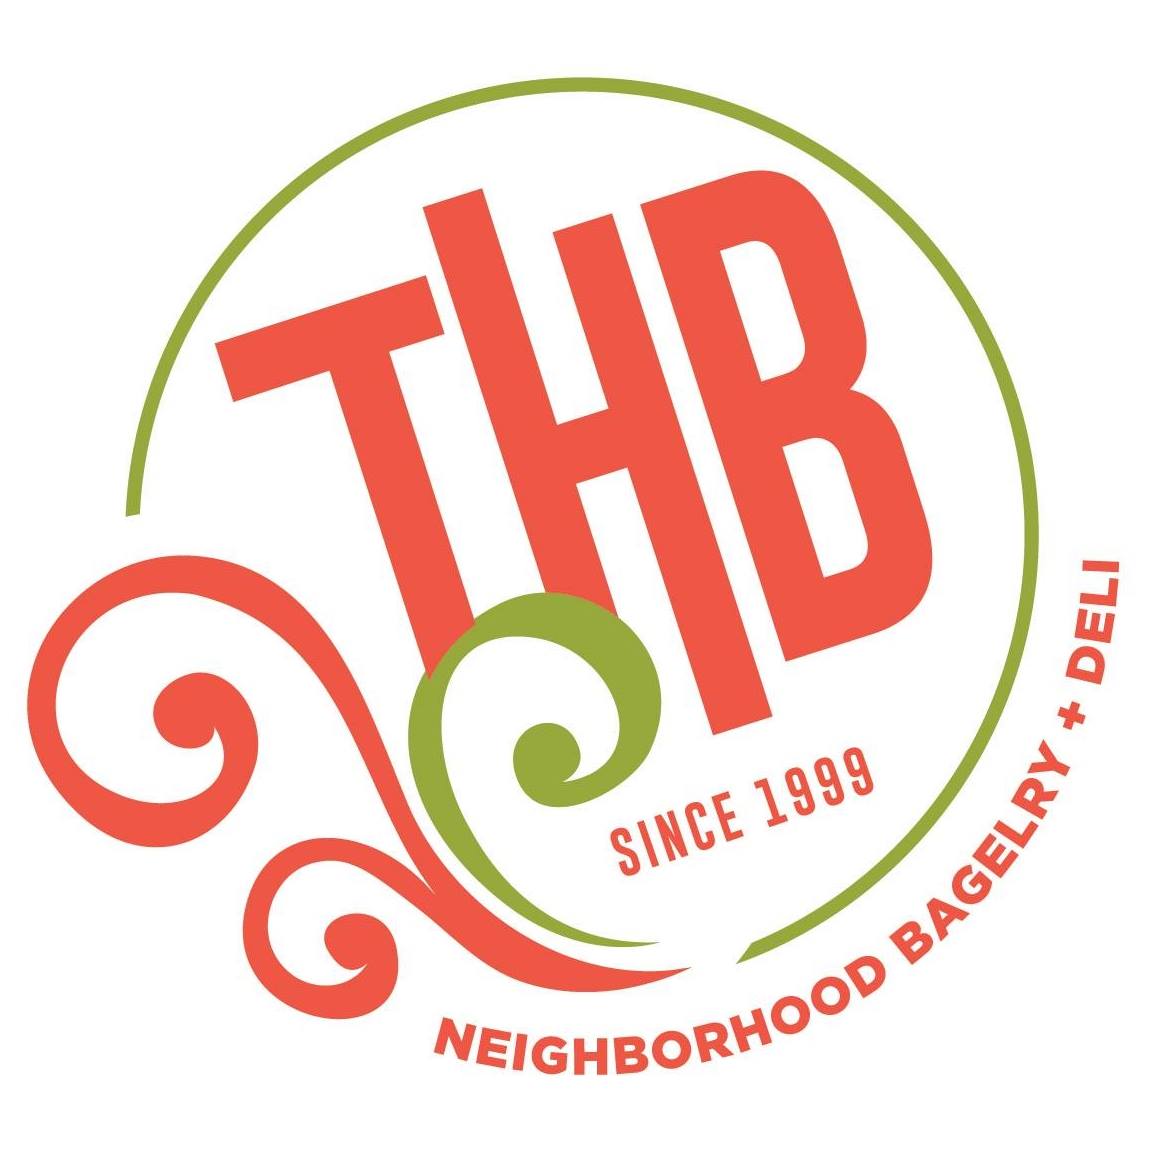 THB Bagelry & Deli of Towson